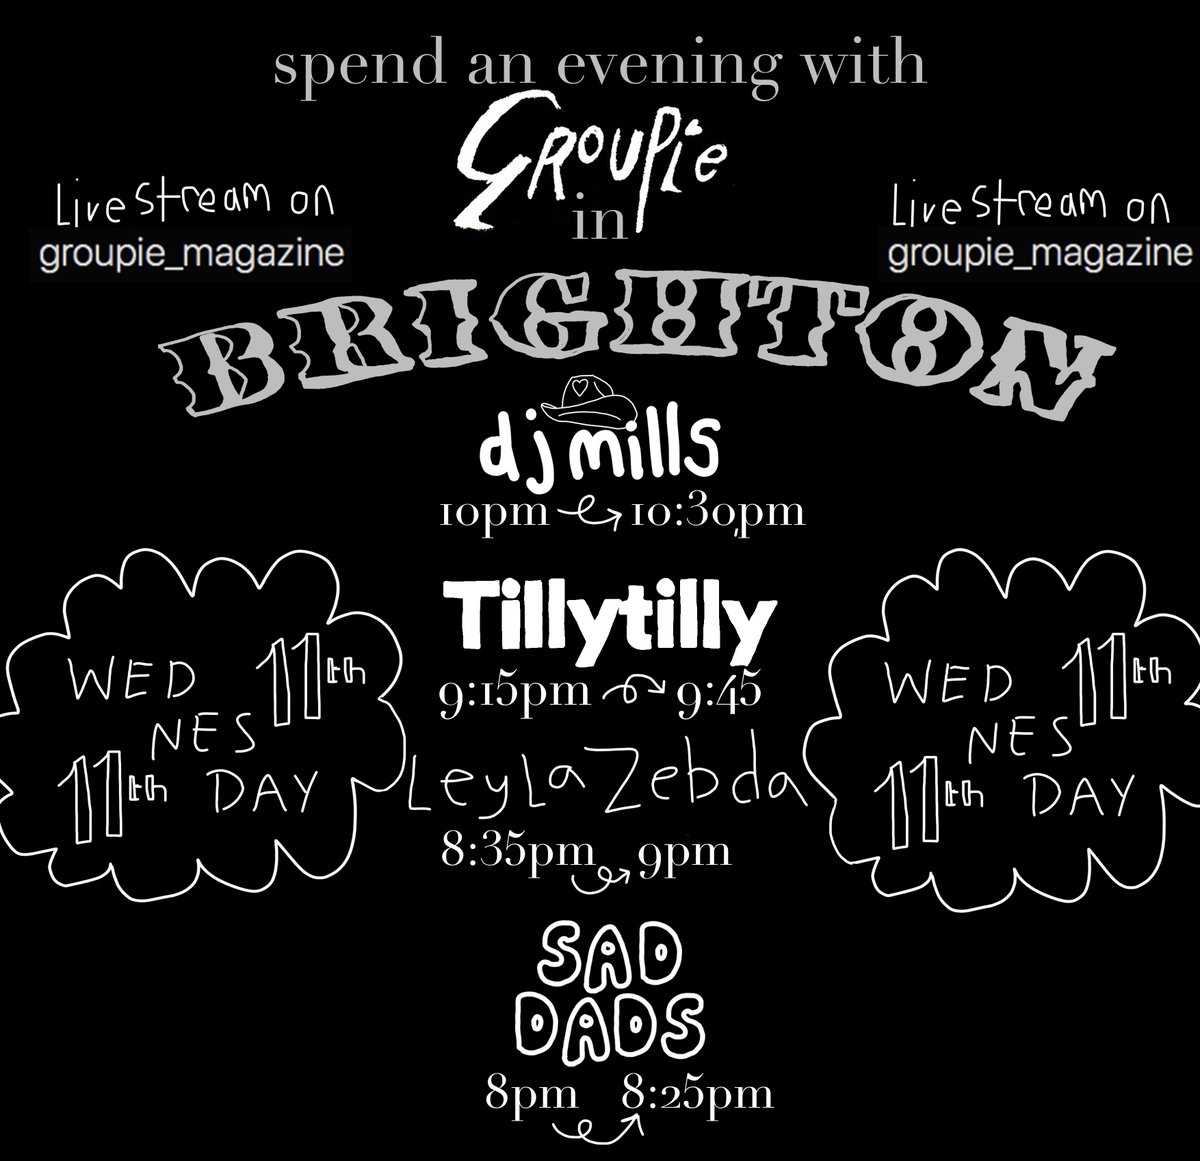 join us on our Brighton leg of the Groupie online tour with Tillytilly, @leybeyzebs and @mysaddads on Wednesday evening for a night of pure passion and rock and roll, in the form of an Instagram livestream on instagram!! all topped off with a banging DJ set from Dj Mills xxx